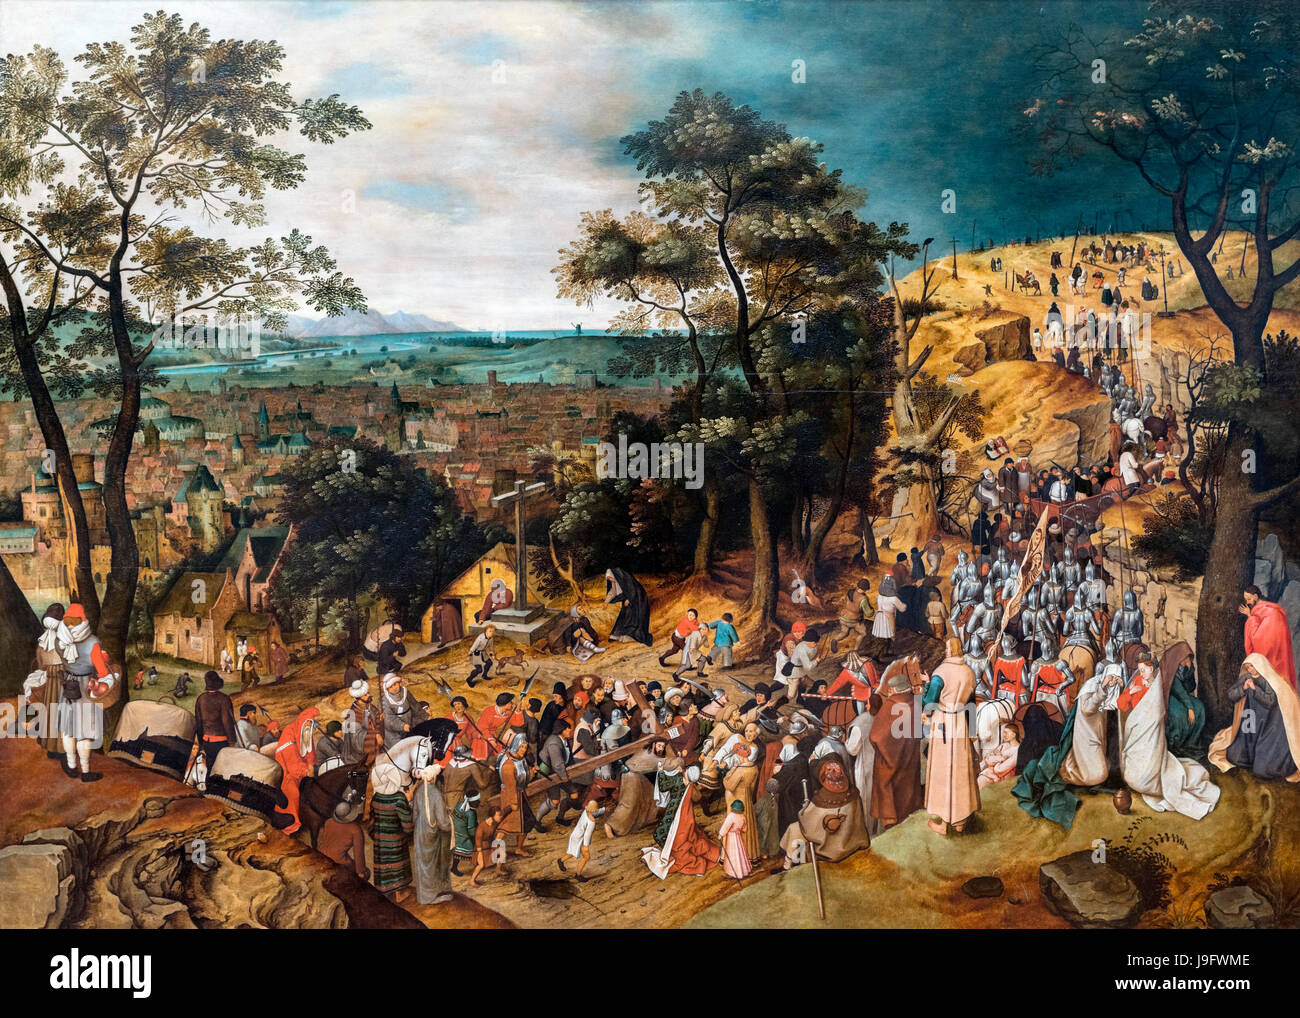 The Road to Calvary by Pieter Brueghel the Younger (1564-1638), 1606 Stock Photo